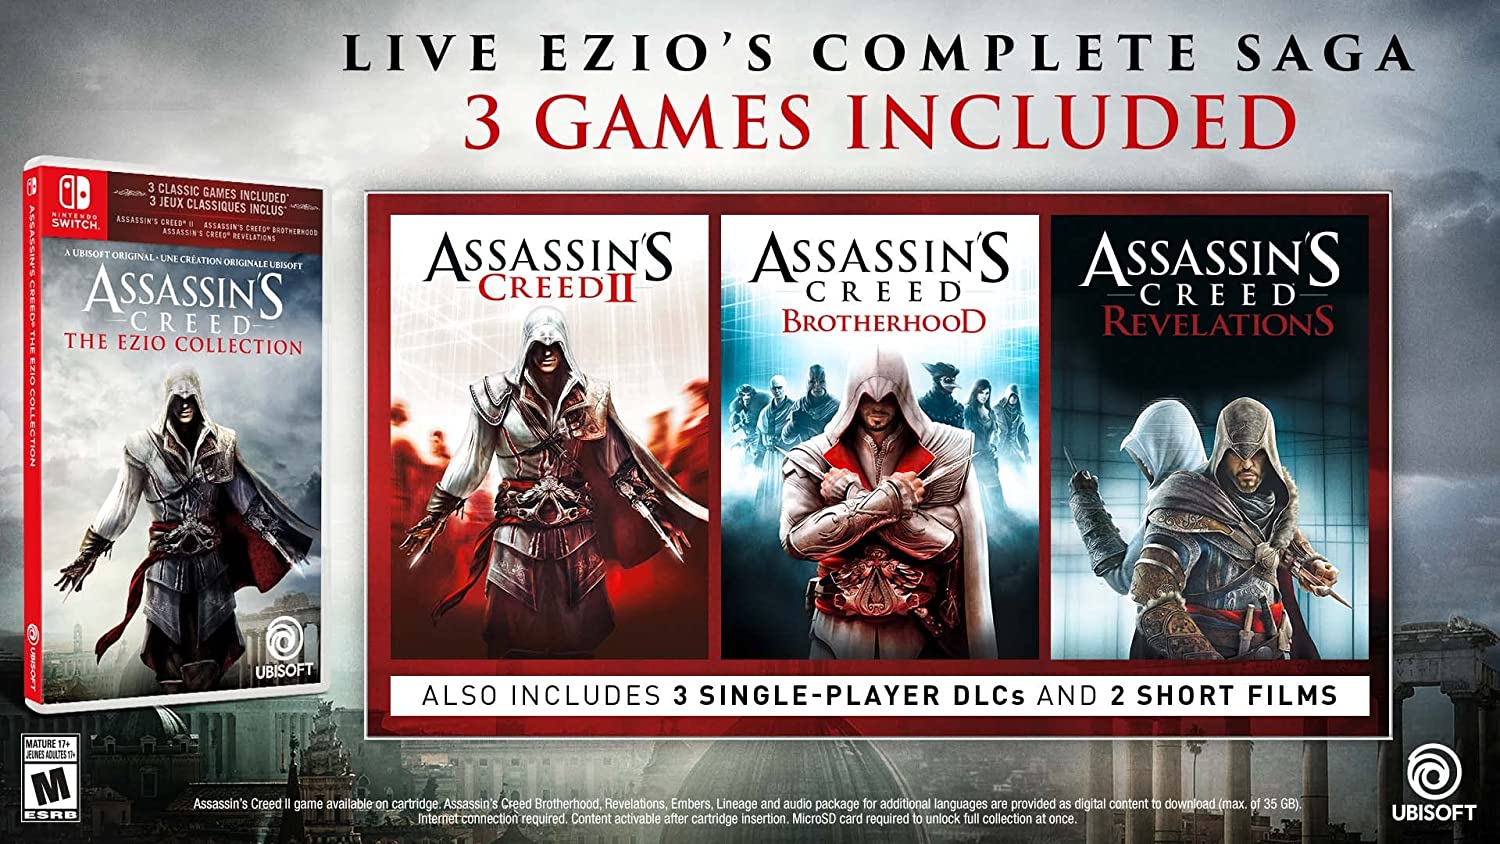 ASSASSIN'S CREED EZIO COLLECTION SWITCH - EasyVideoGame